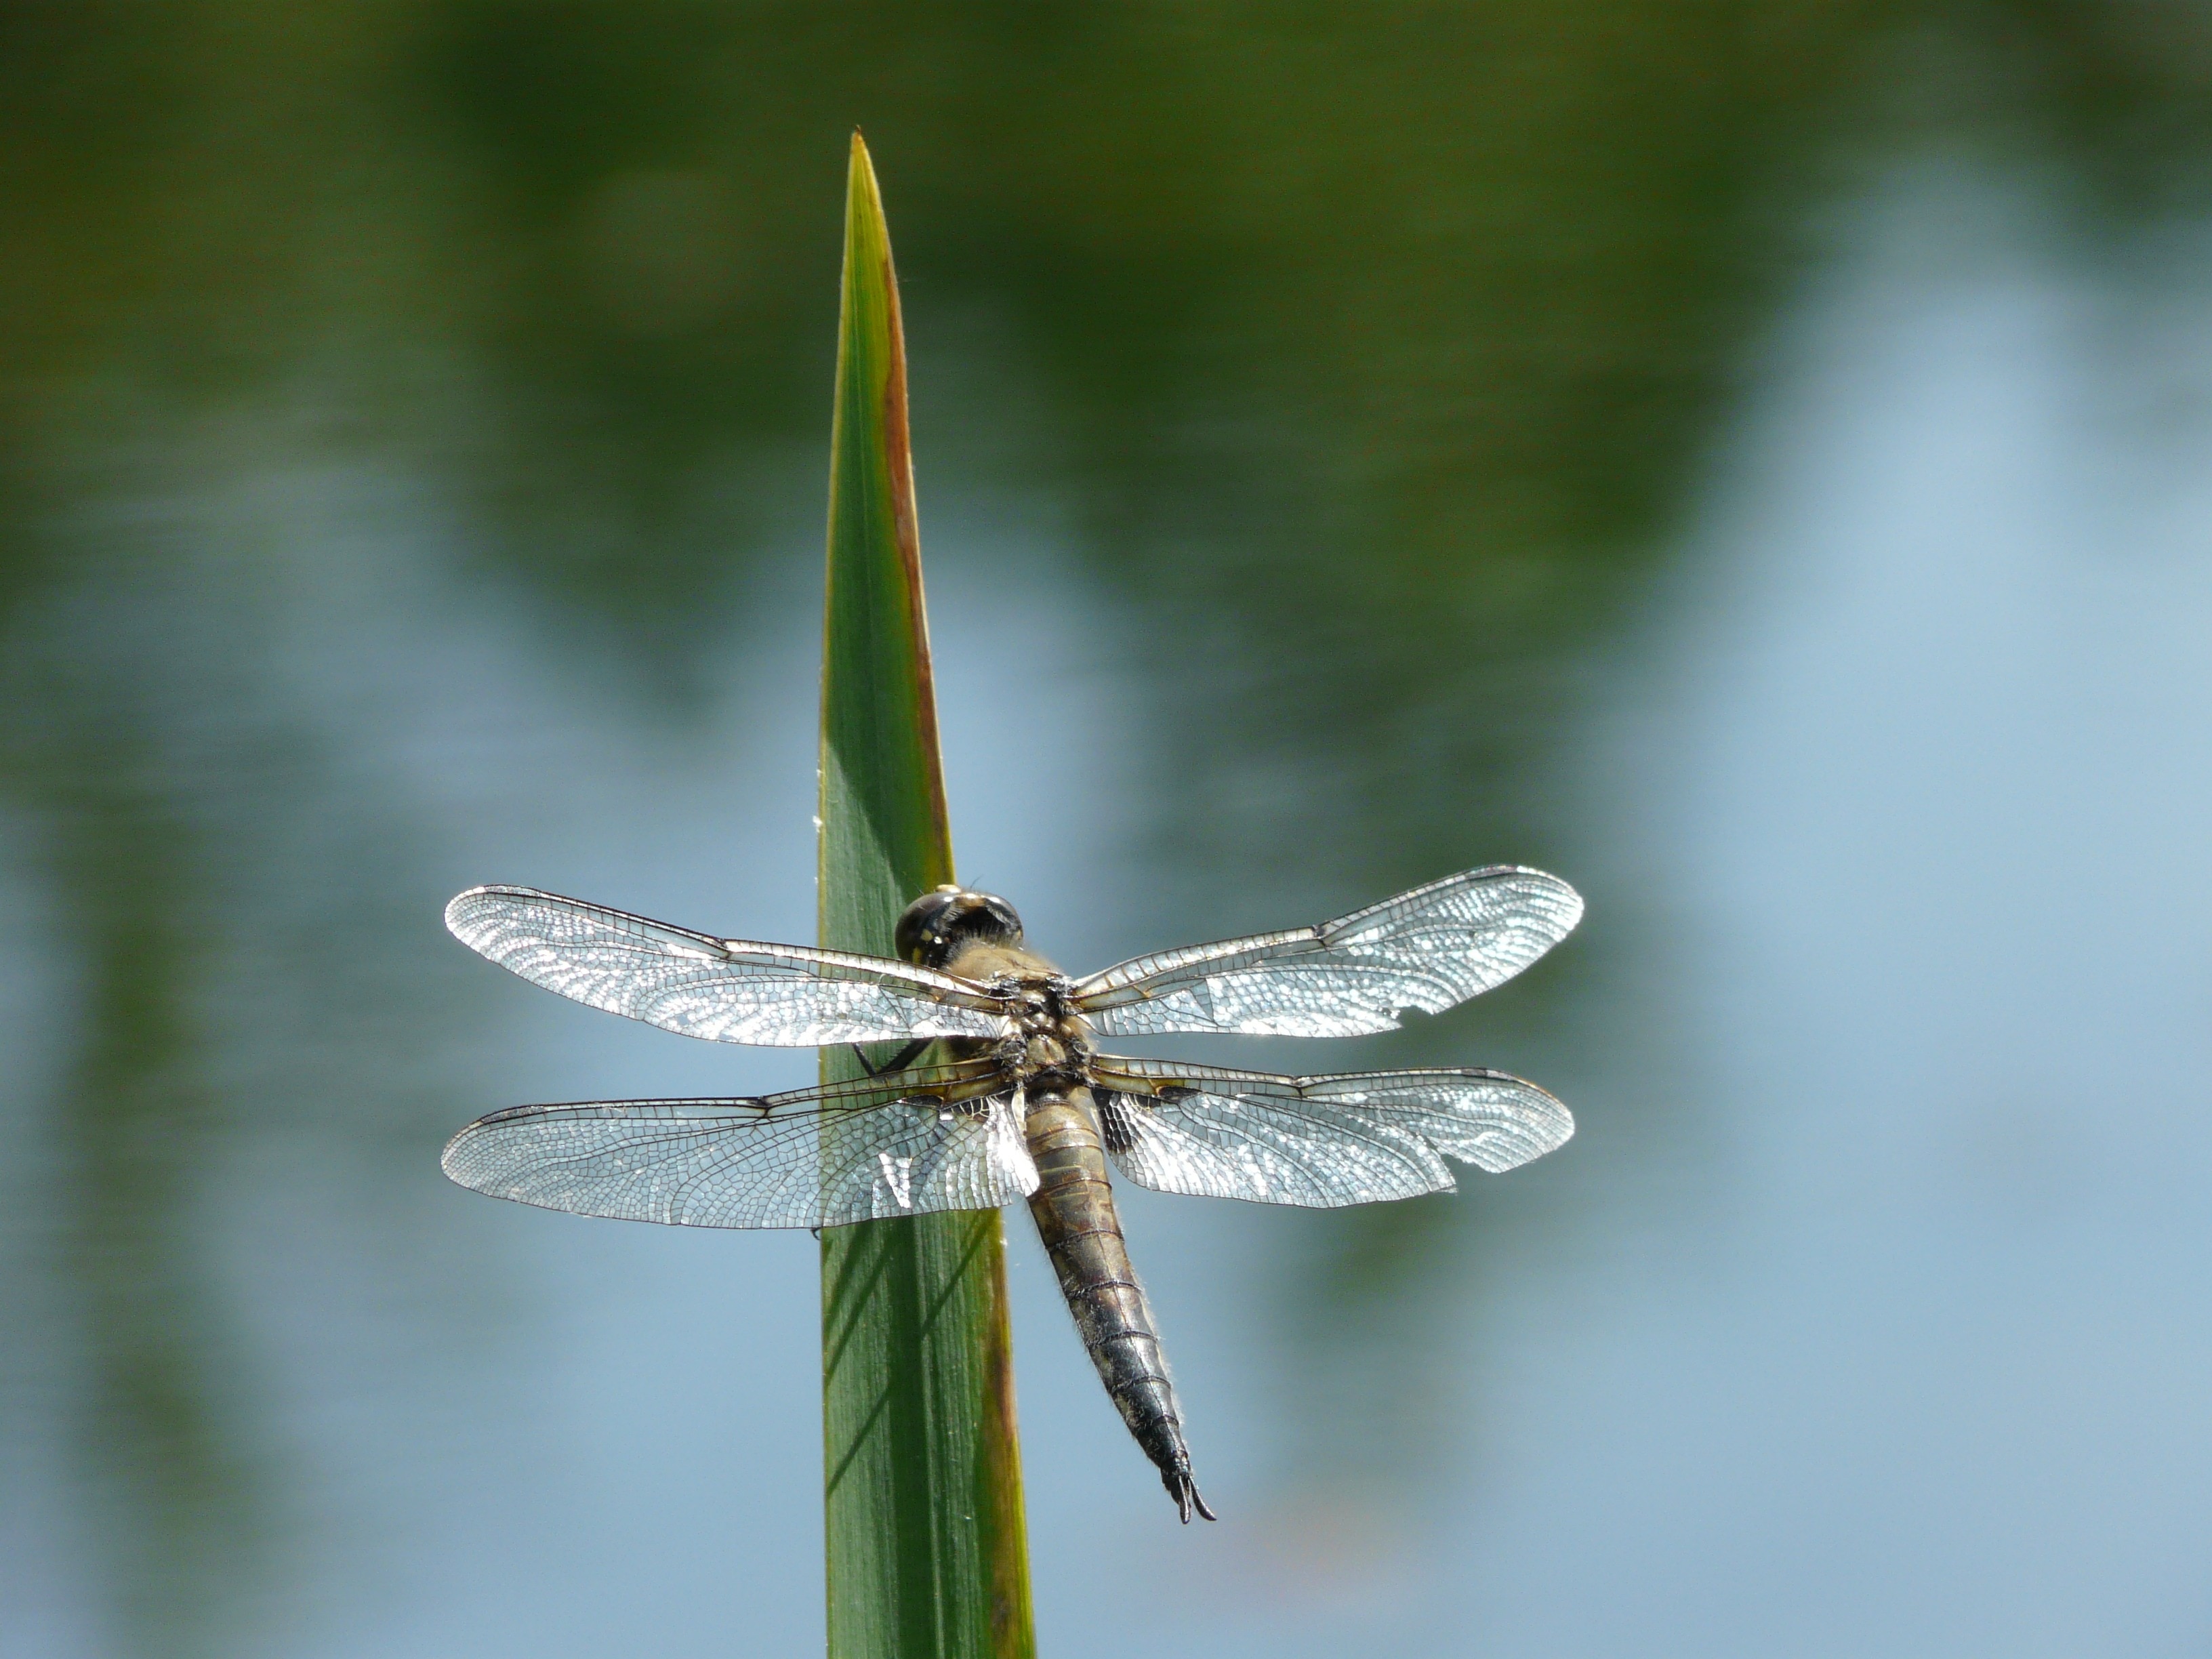 Fly, Green, Summer, Insect, Dragonfly, one animal, close-up